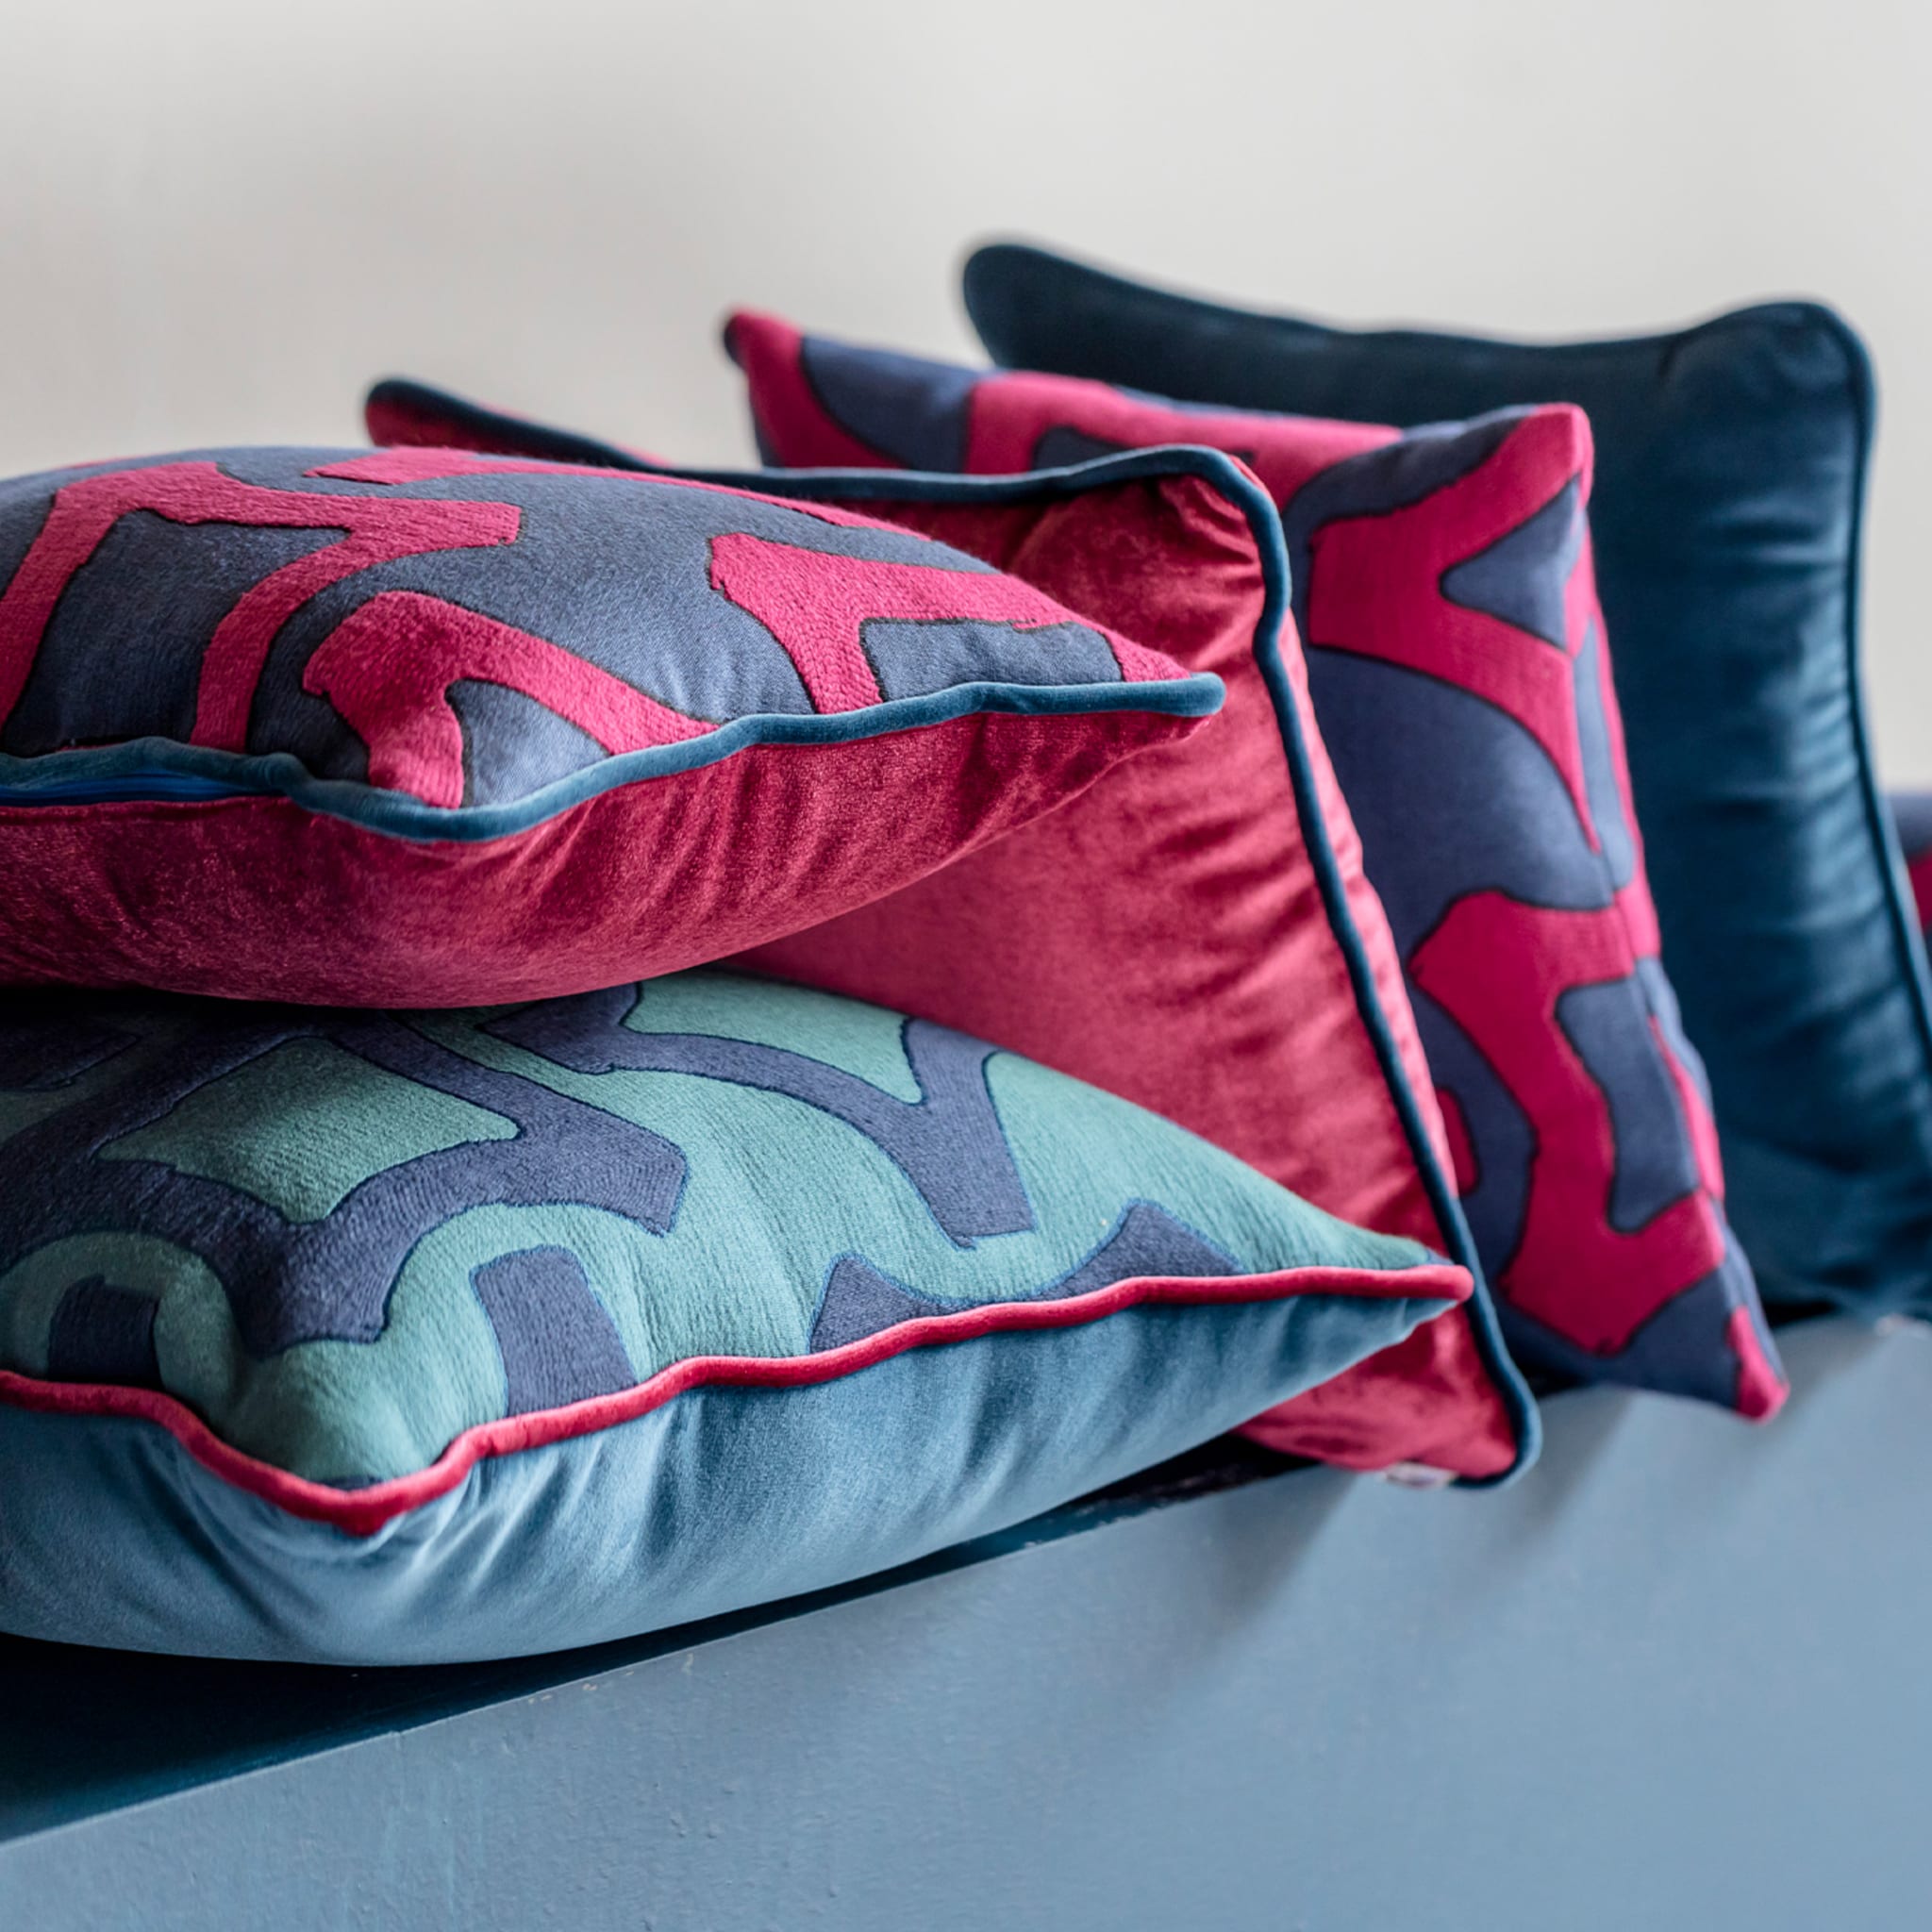 Carrè Large Patterned Blue and Fuchsia Square Cushion - Alternative view 4